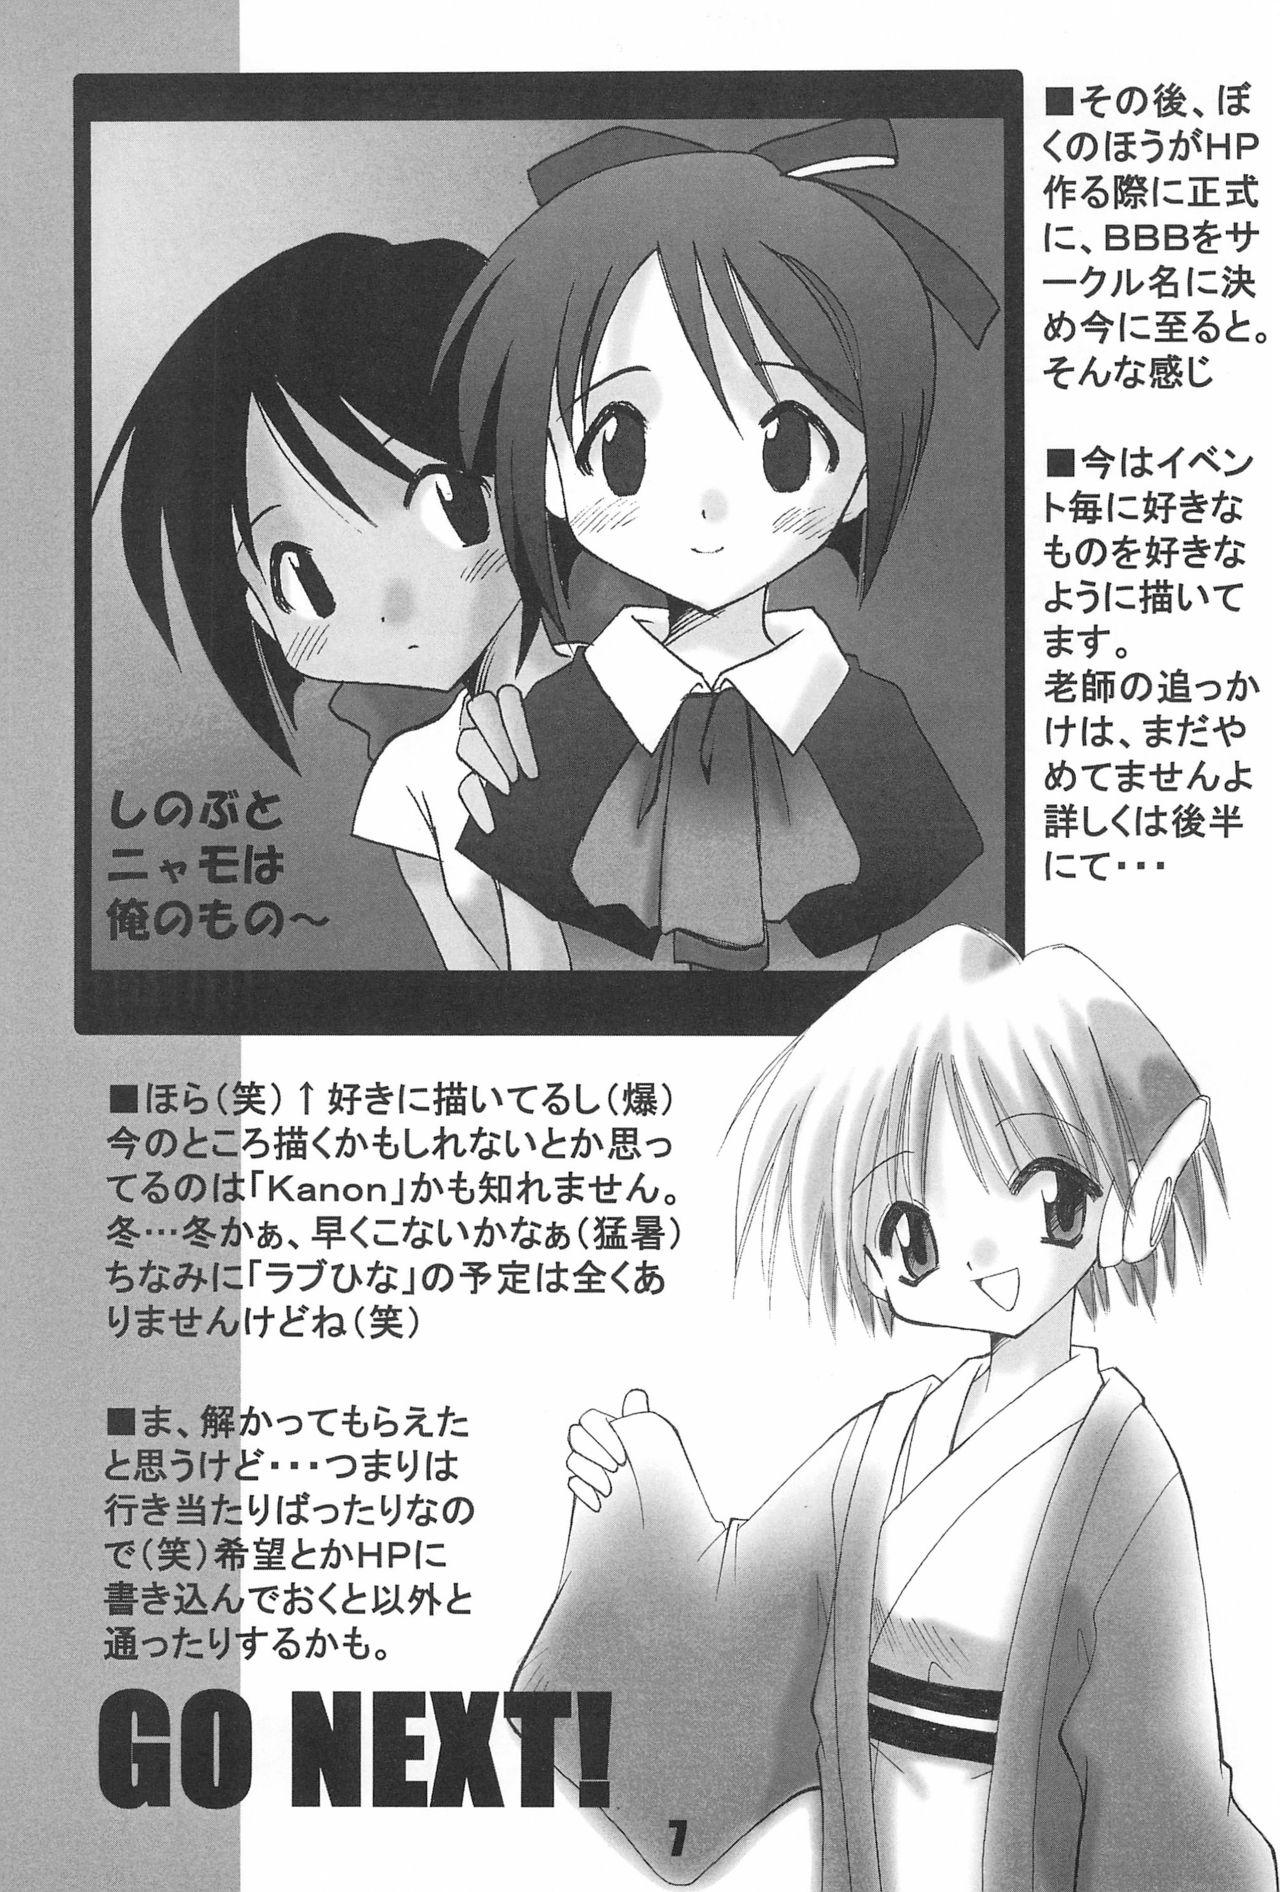 Swingers BBB OFFICIAL GUIDE BOOK - Cardcaptor sakura Amatoriale - Page 7